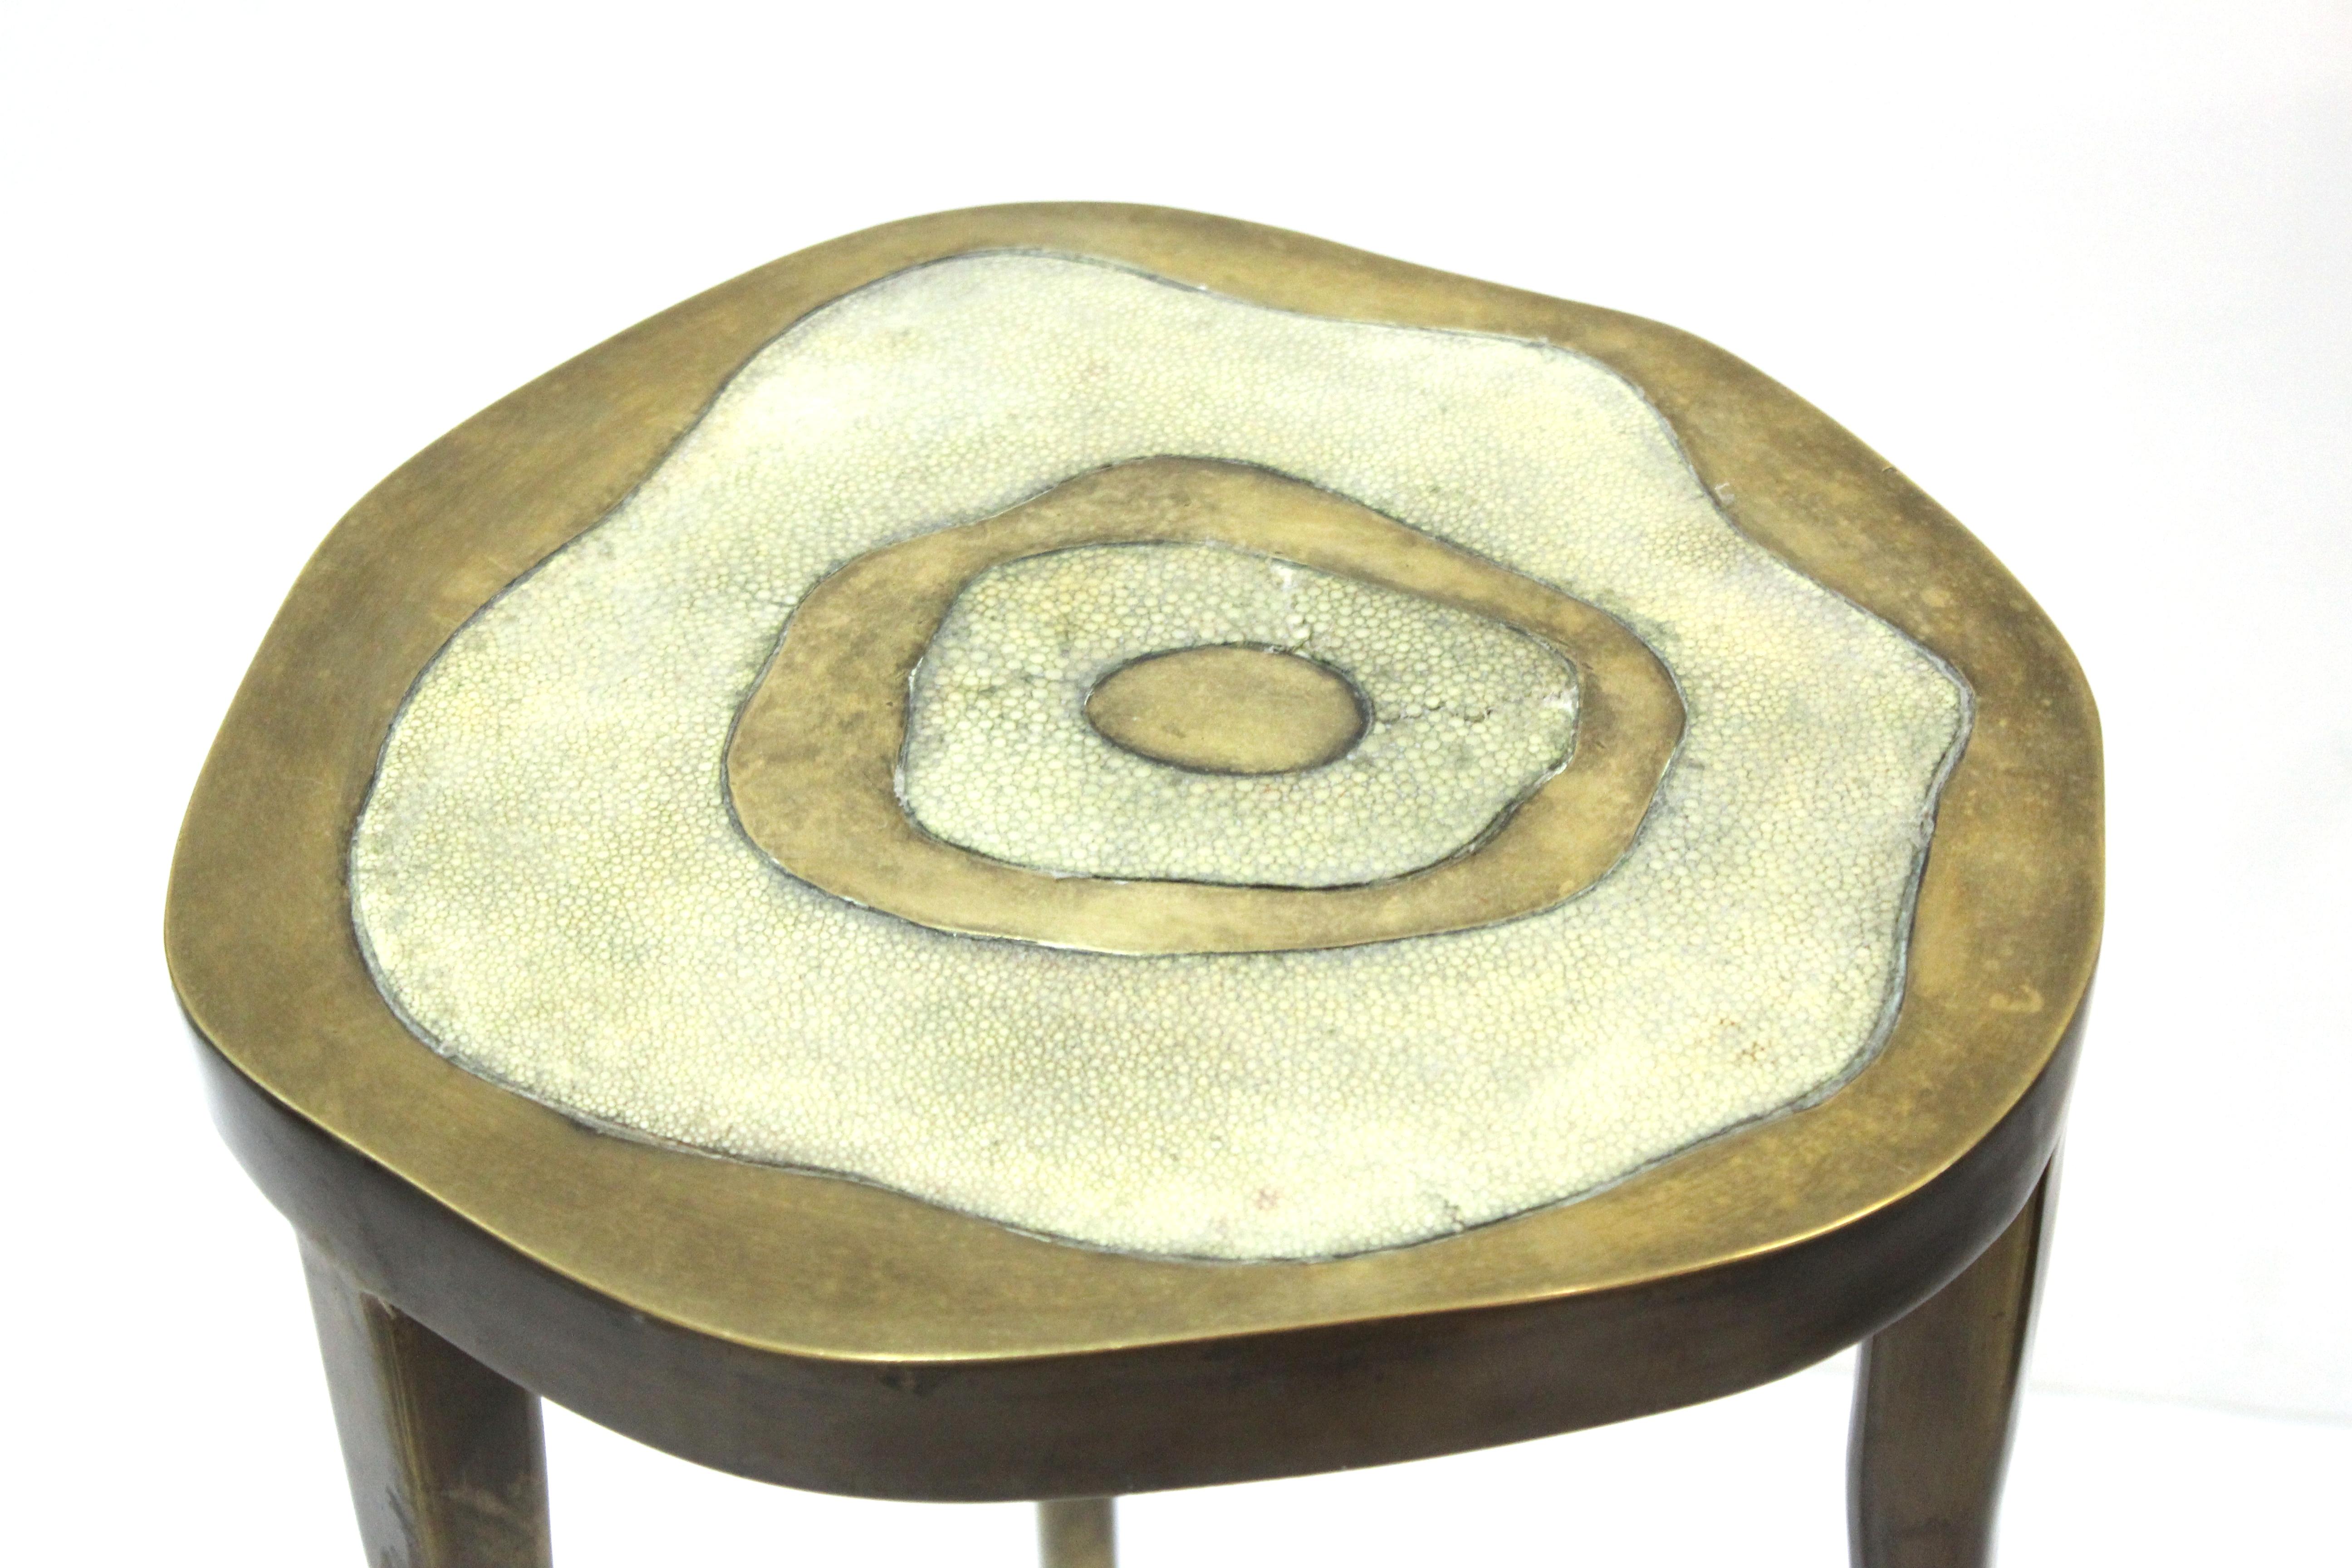 Modern Art Deco style three-legged side table in bronze patinated brass with a shagreen inlay top, designed and hand-crafted by Ria & Yiouri Augousti in Paris, France. Makers label plaque on the bottom. The piece is in great vintage condition with